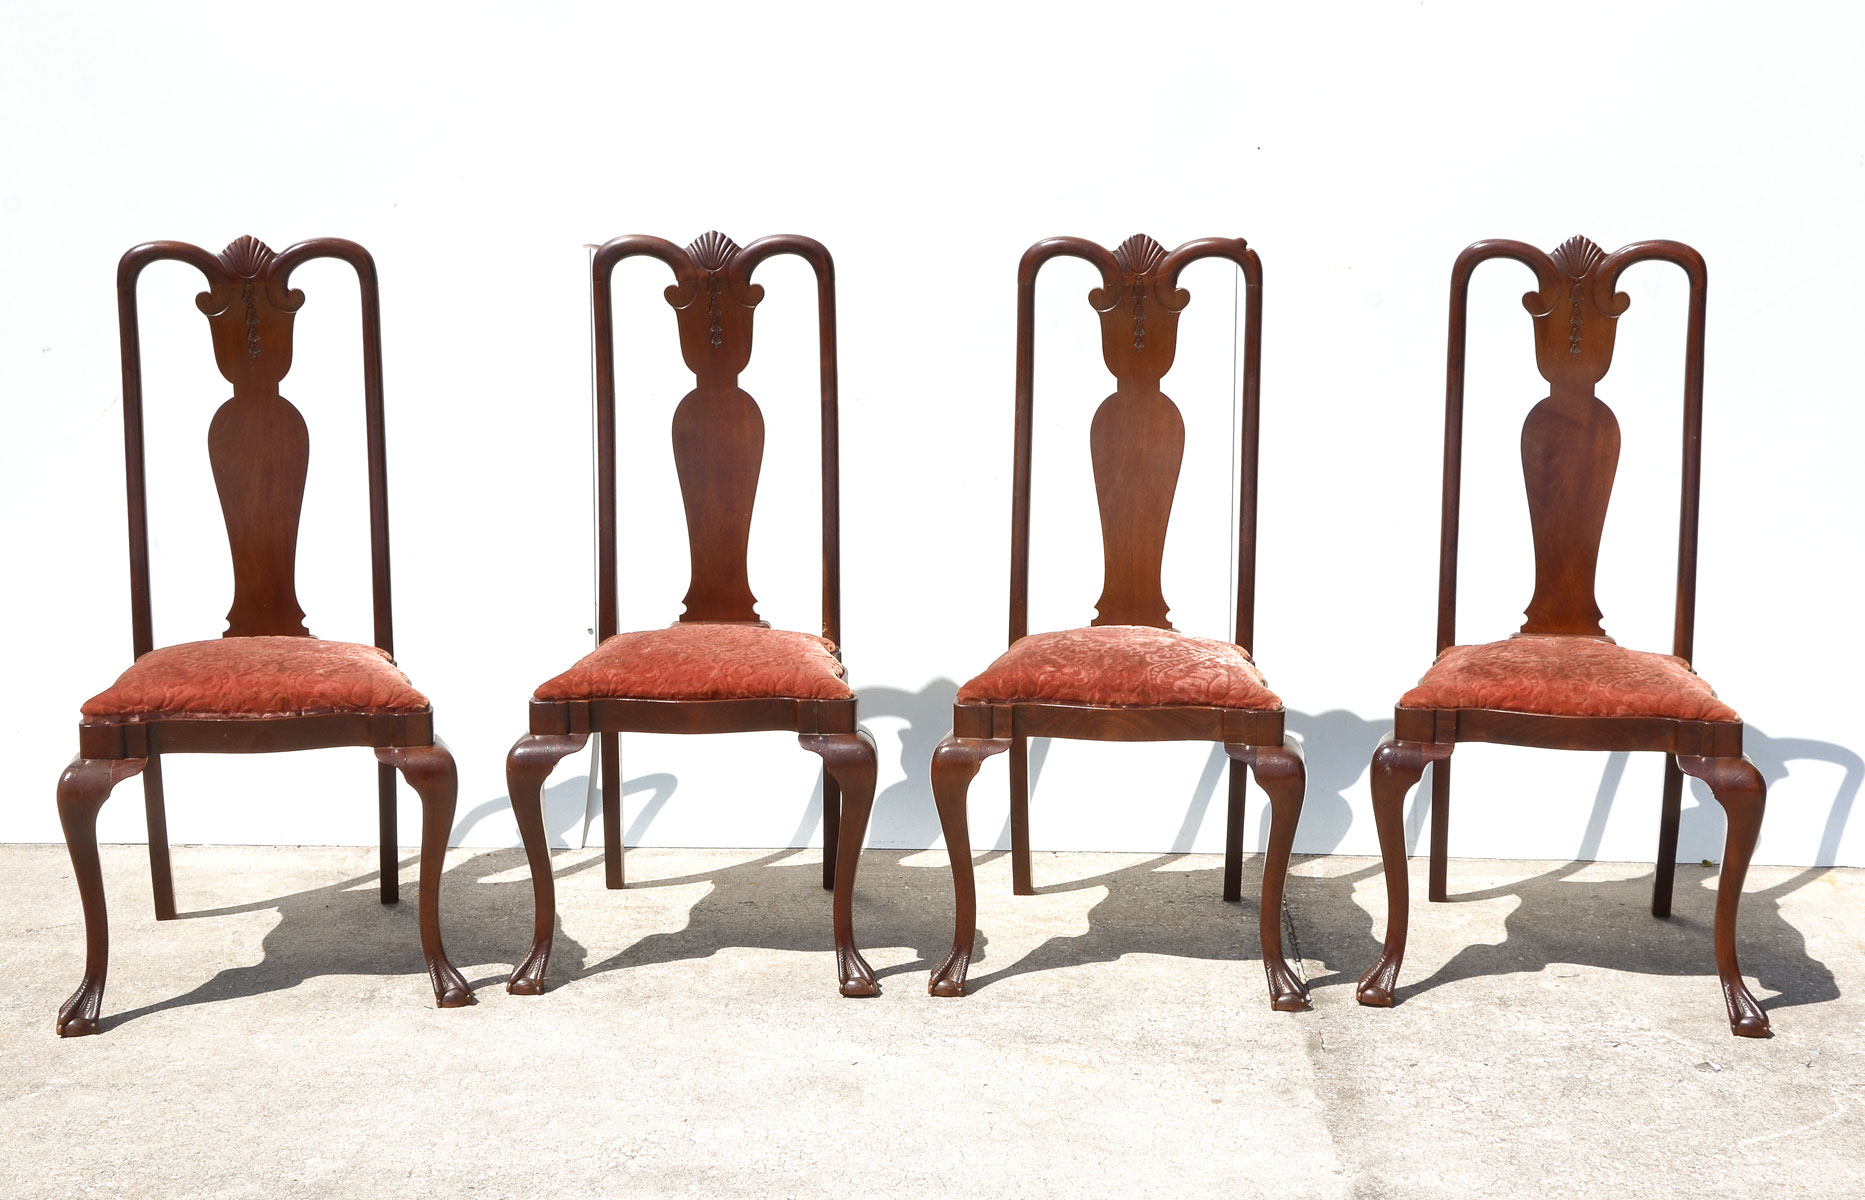 4 CHIPPENDALE CHAIRS Chippendale 36df51